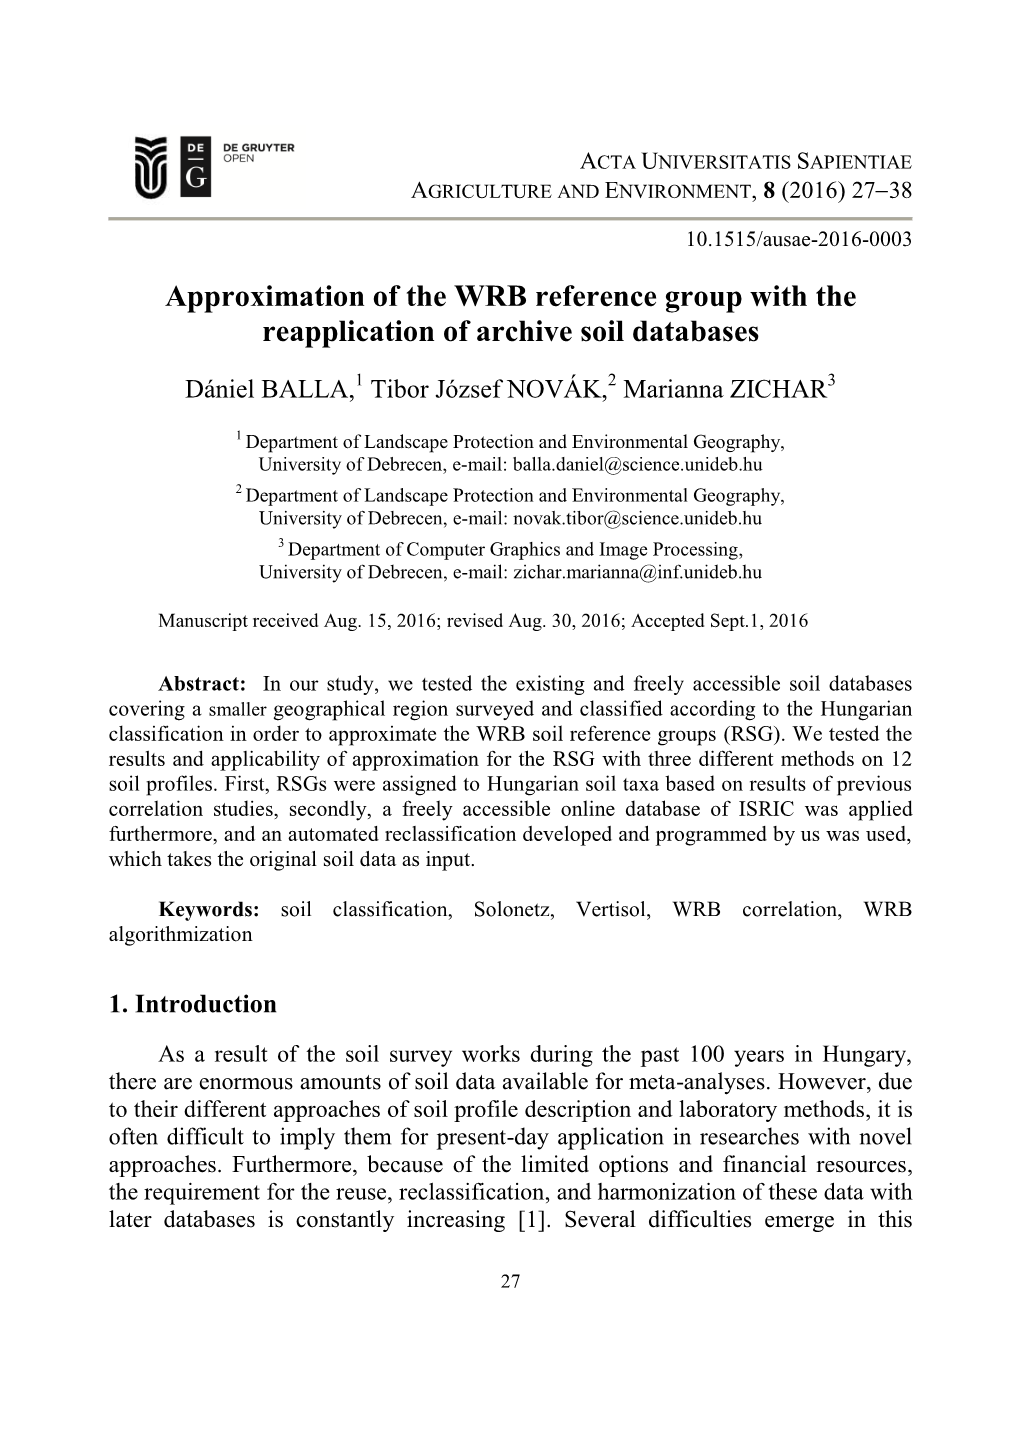 Approximation of the WRB Reference Group with the Reapplication of Archive Soil Databases